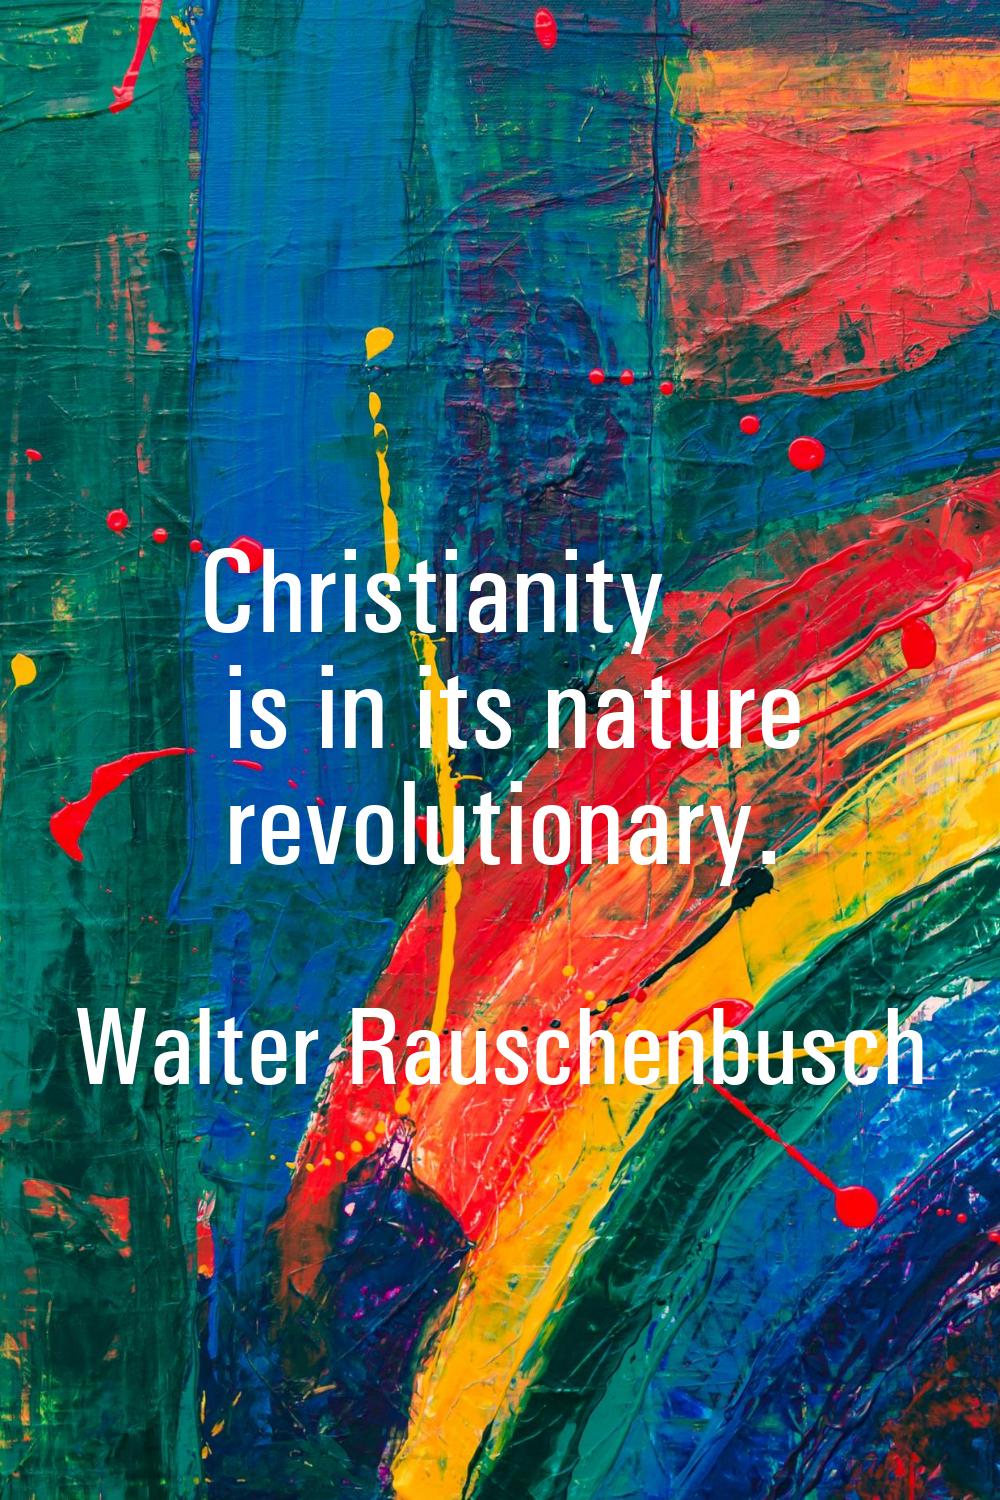 Christianity is in its nature revolutionary.